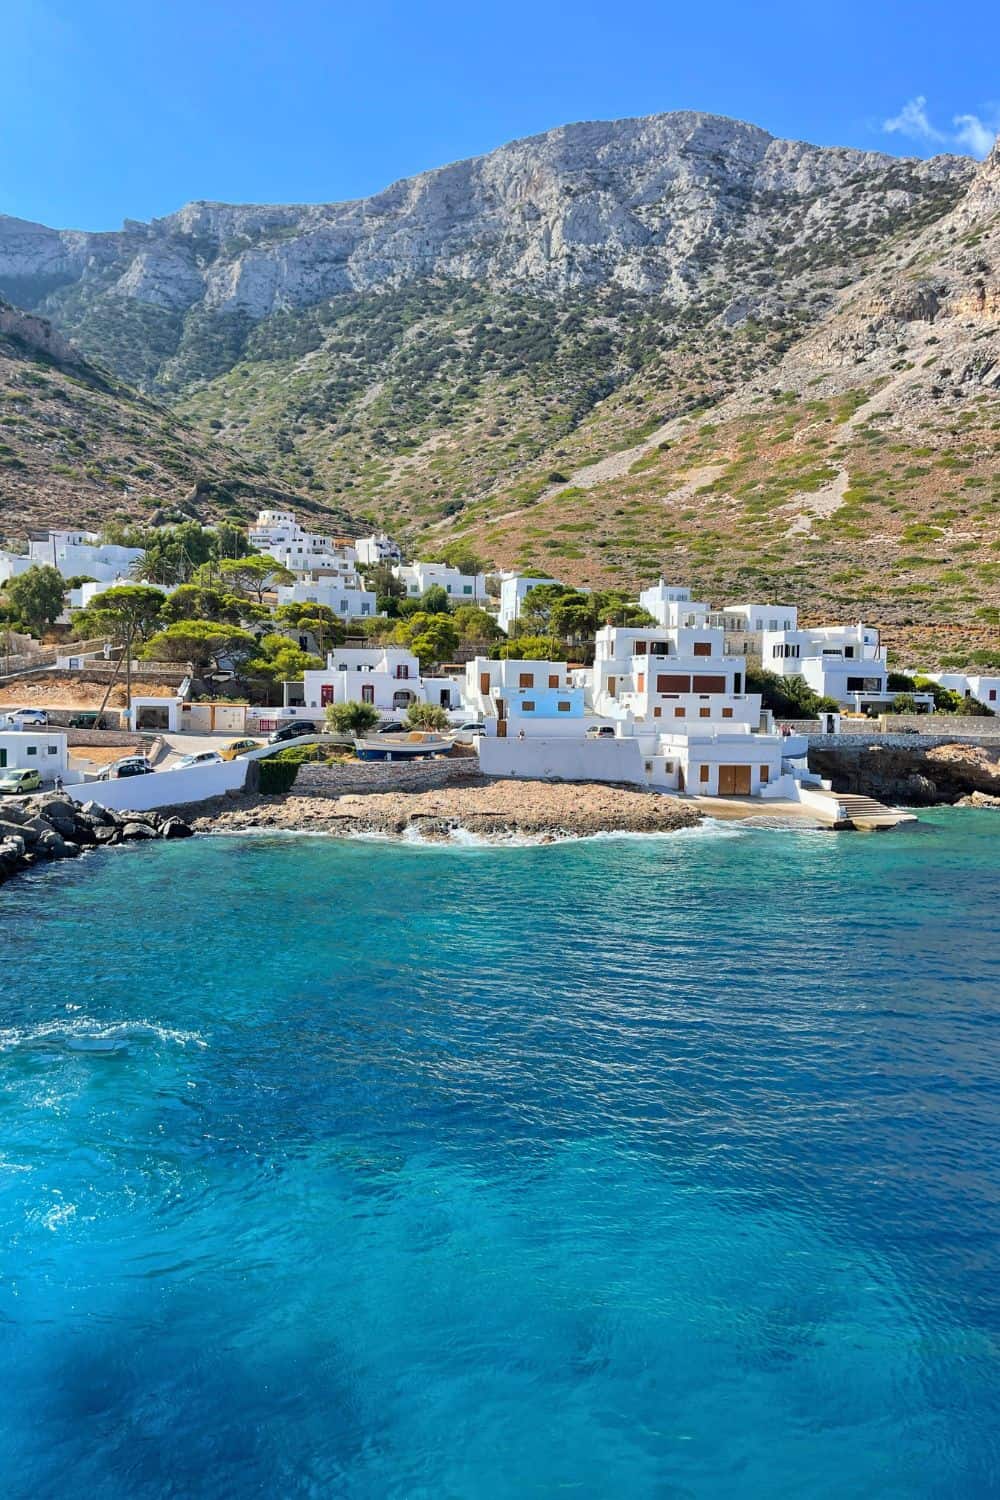 A tranquil coastal village in Sifnos nestled at the base of rugged hills, with whitewashed buildings reflecting the bright sunlight. The azure waters of the Aegean Sea gently kiss the rocky shoreline, inviting visitors to ponder the allure of the island.